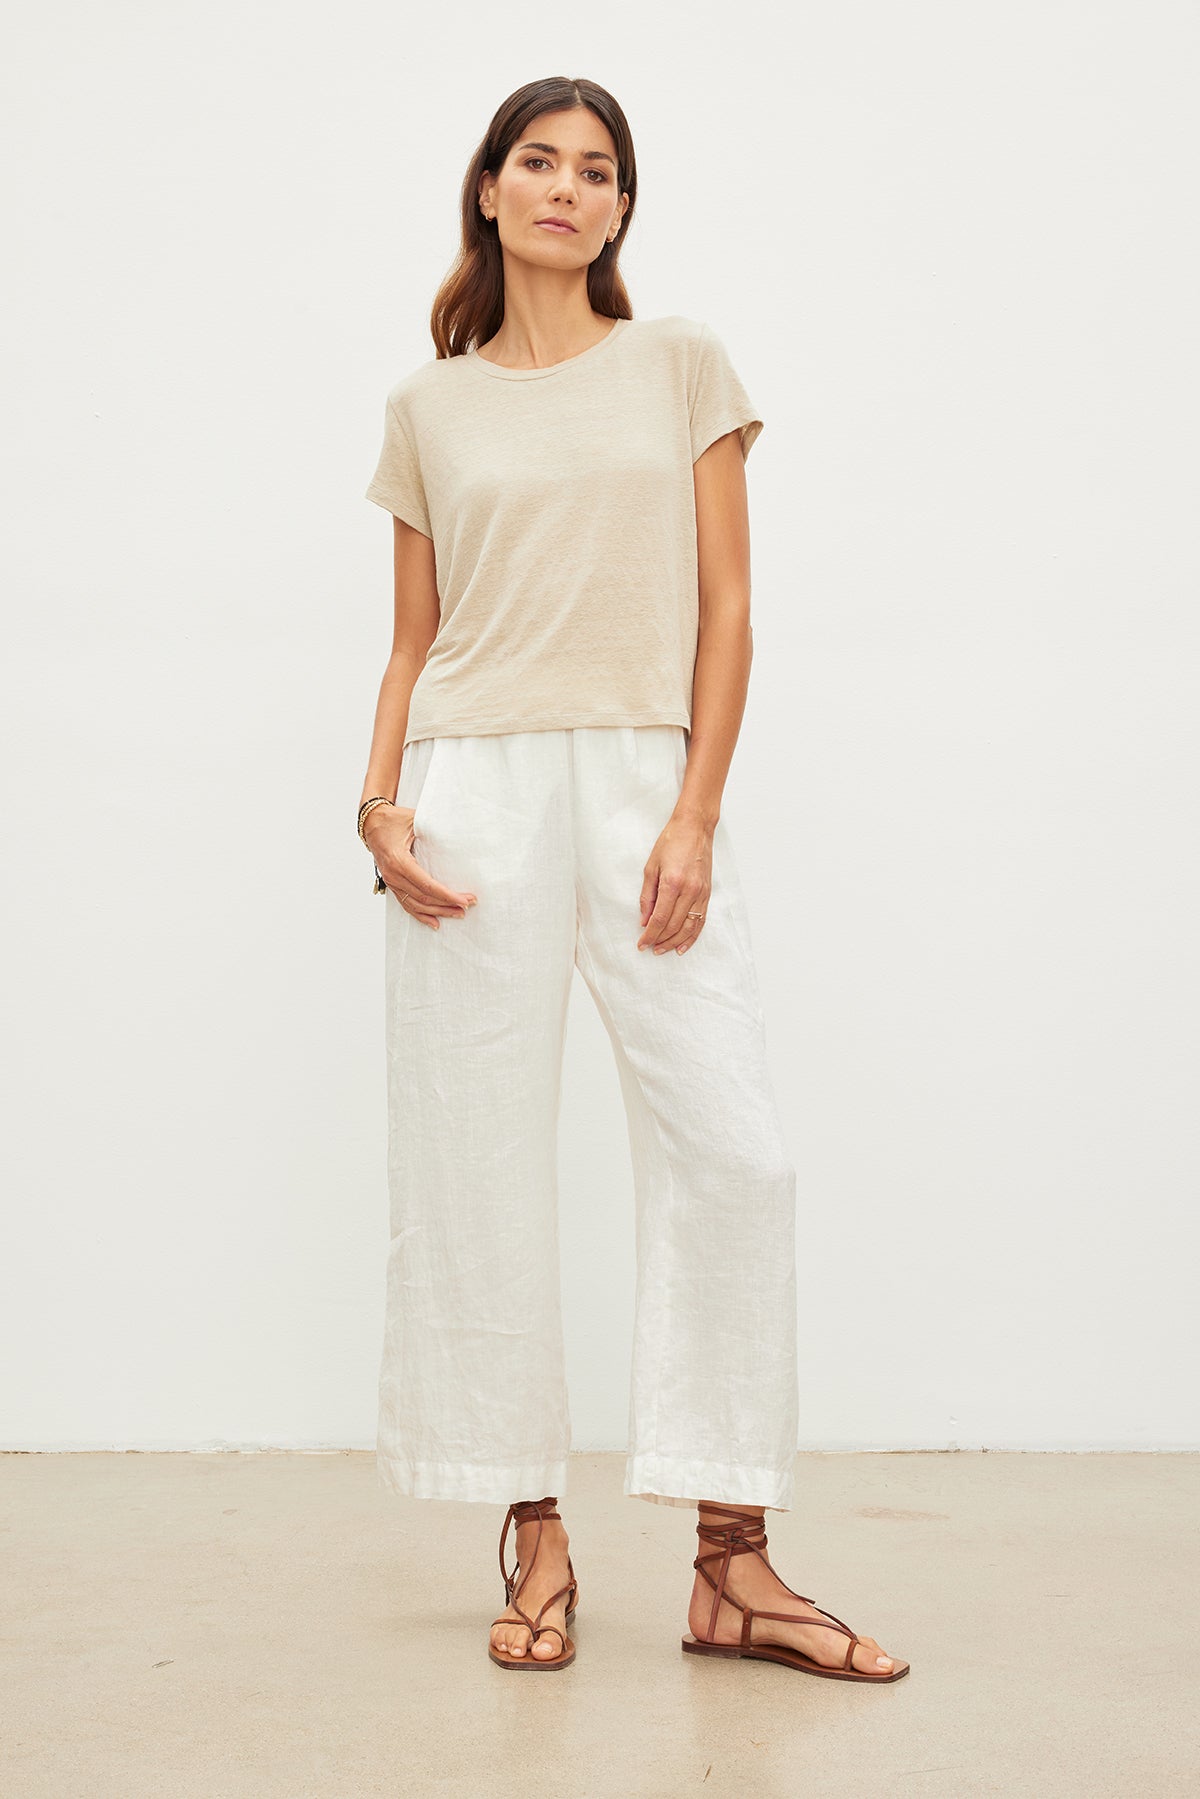 The model is wearing a must-have Velvet by Graham & Spencer Casey Linen Knit Crew Neck Tee and white linen pants.-35955506020545